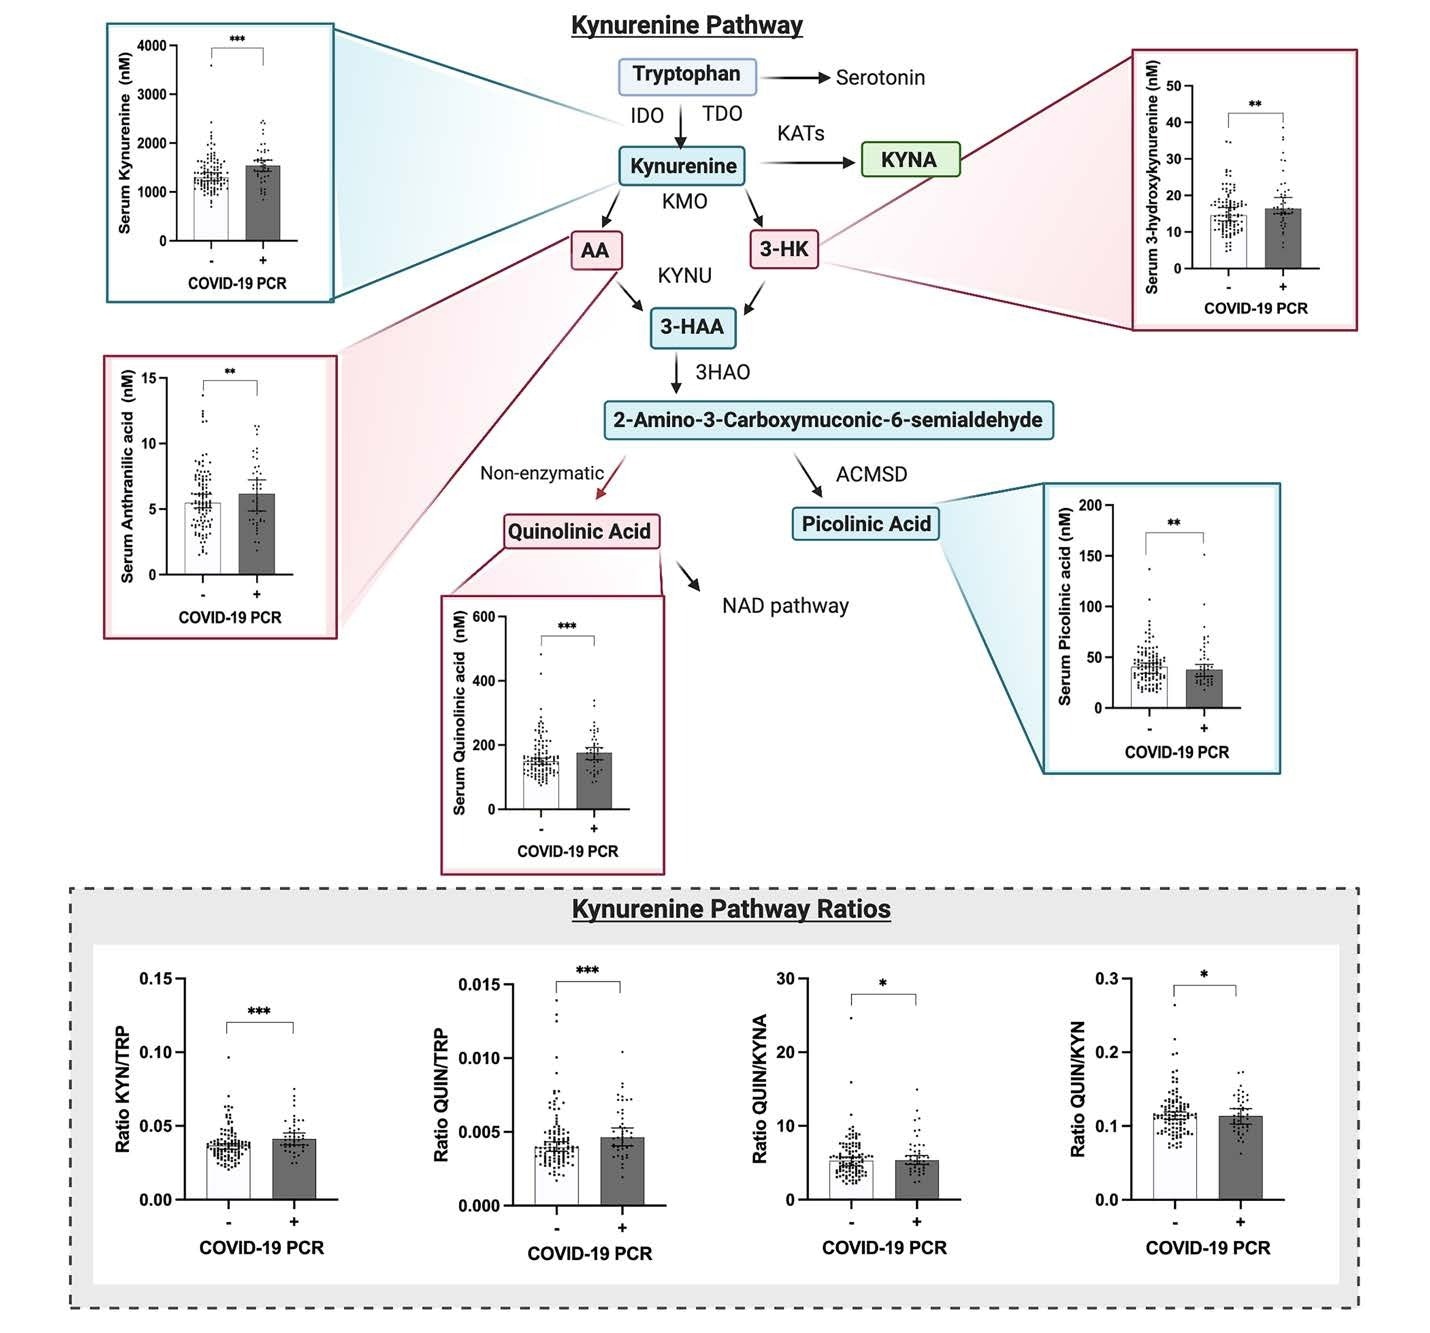 The kynurenine pathway is altered in patients with mild COVID-19, who present increased levels of neurotoxic metabolites. Significantly increased levels of kynurenine (data adjusted for age and sex, ANOVA test F: 11.195, p<0.001 ***), 3-hydroxykynurenine (data adjusted for age and sex, ANOVA test F: 3.390,